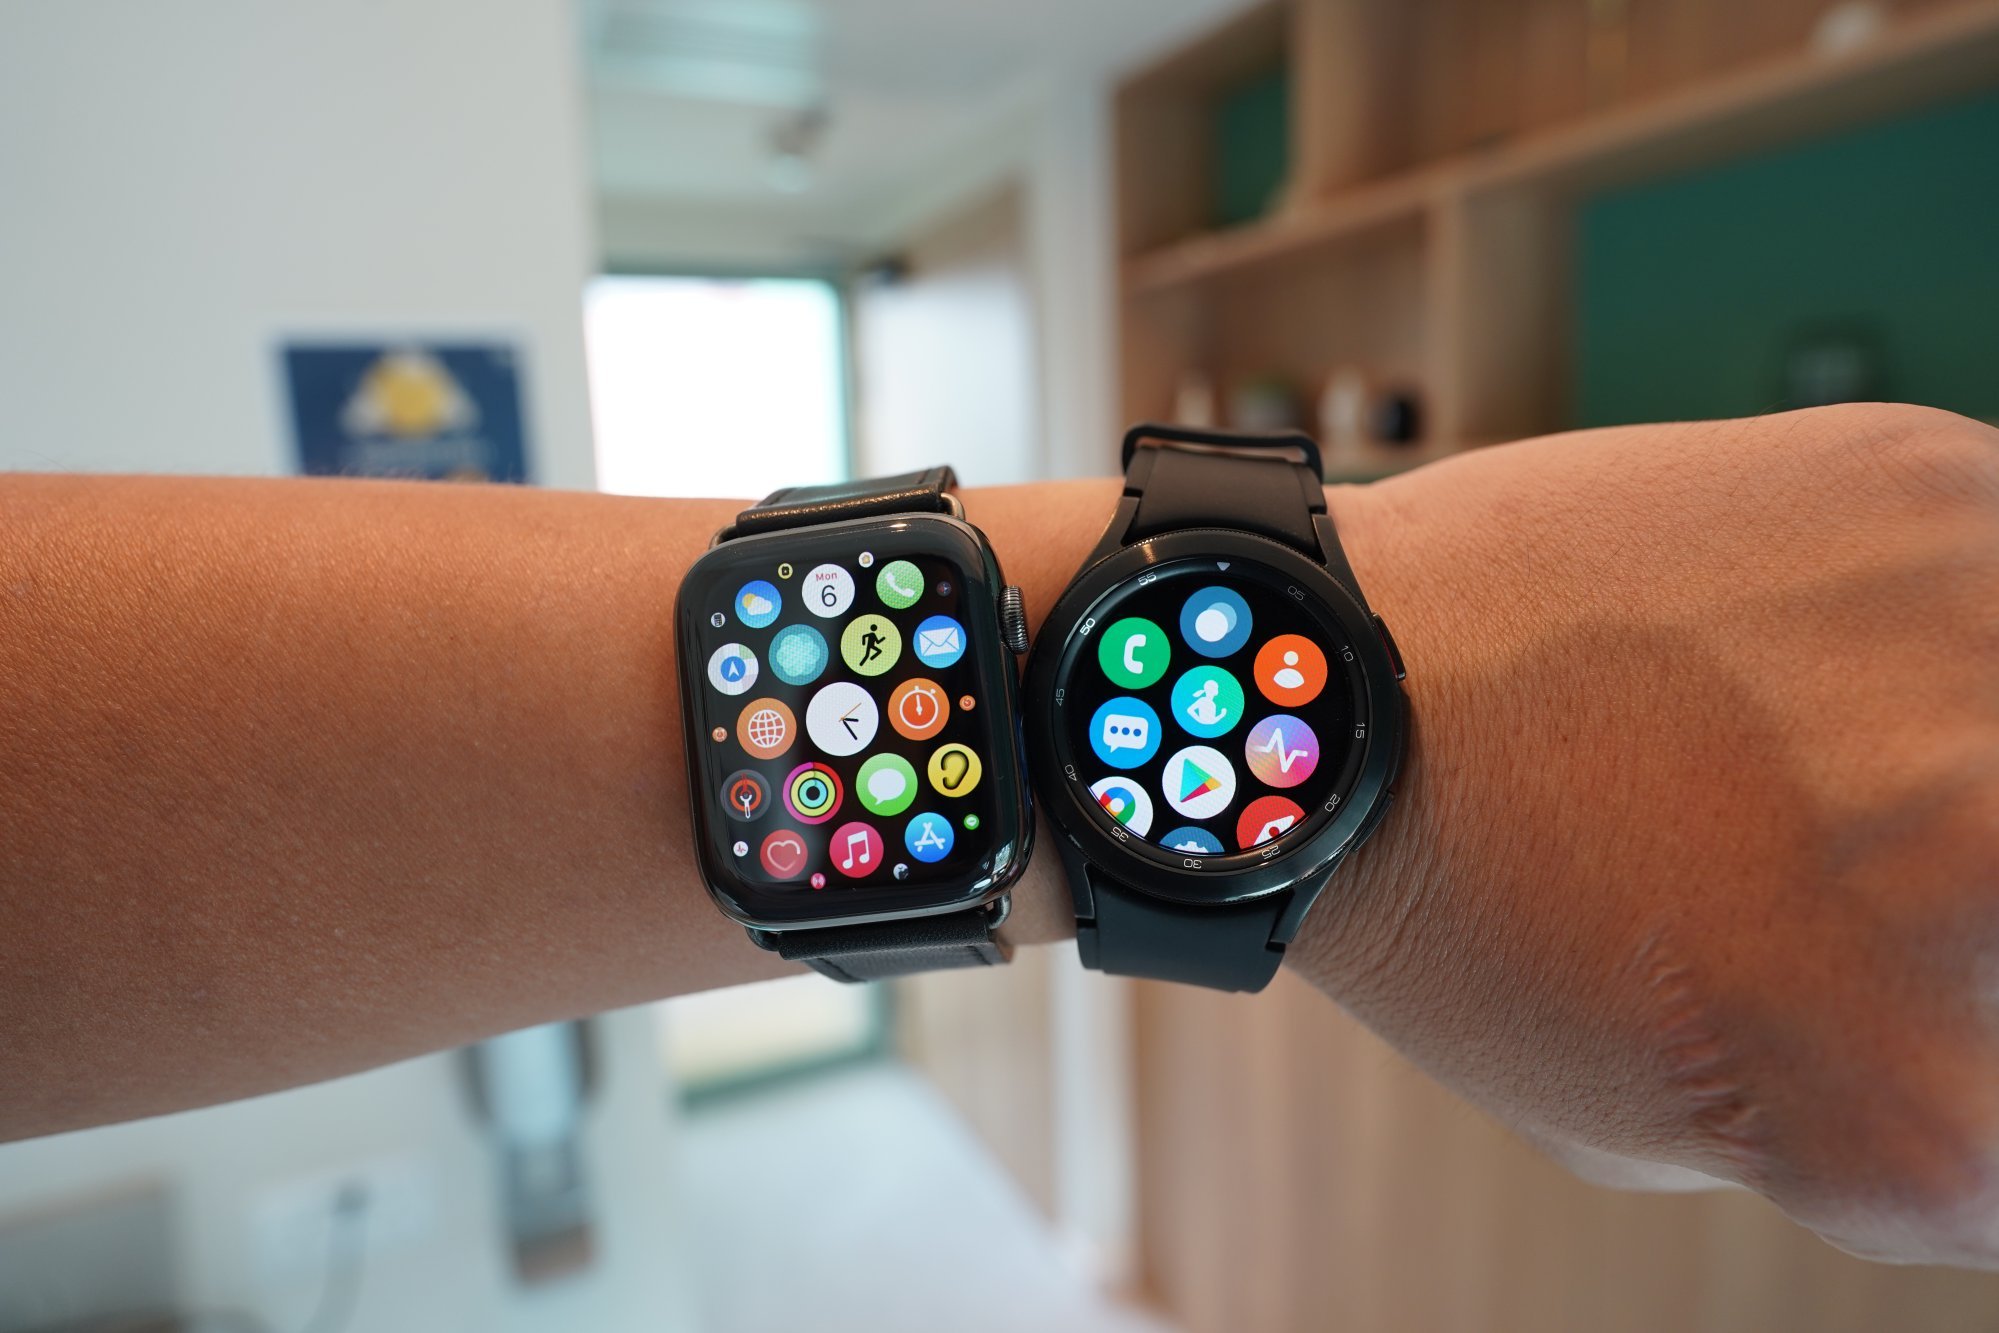 Onderscheid Enzovoorts Kloppen Smartwatch showdown: Apple Watch Series 6 vs Samsung Galaxy Watch 4 Classic  – is Wear OS a game-changer for the Samsung? | South China Morning Post